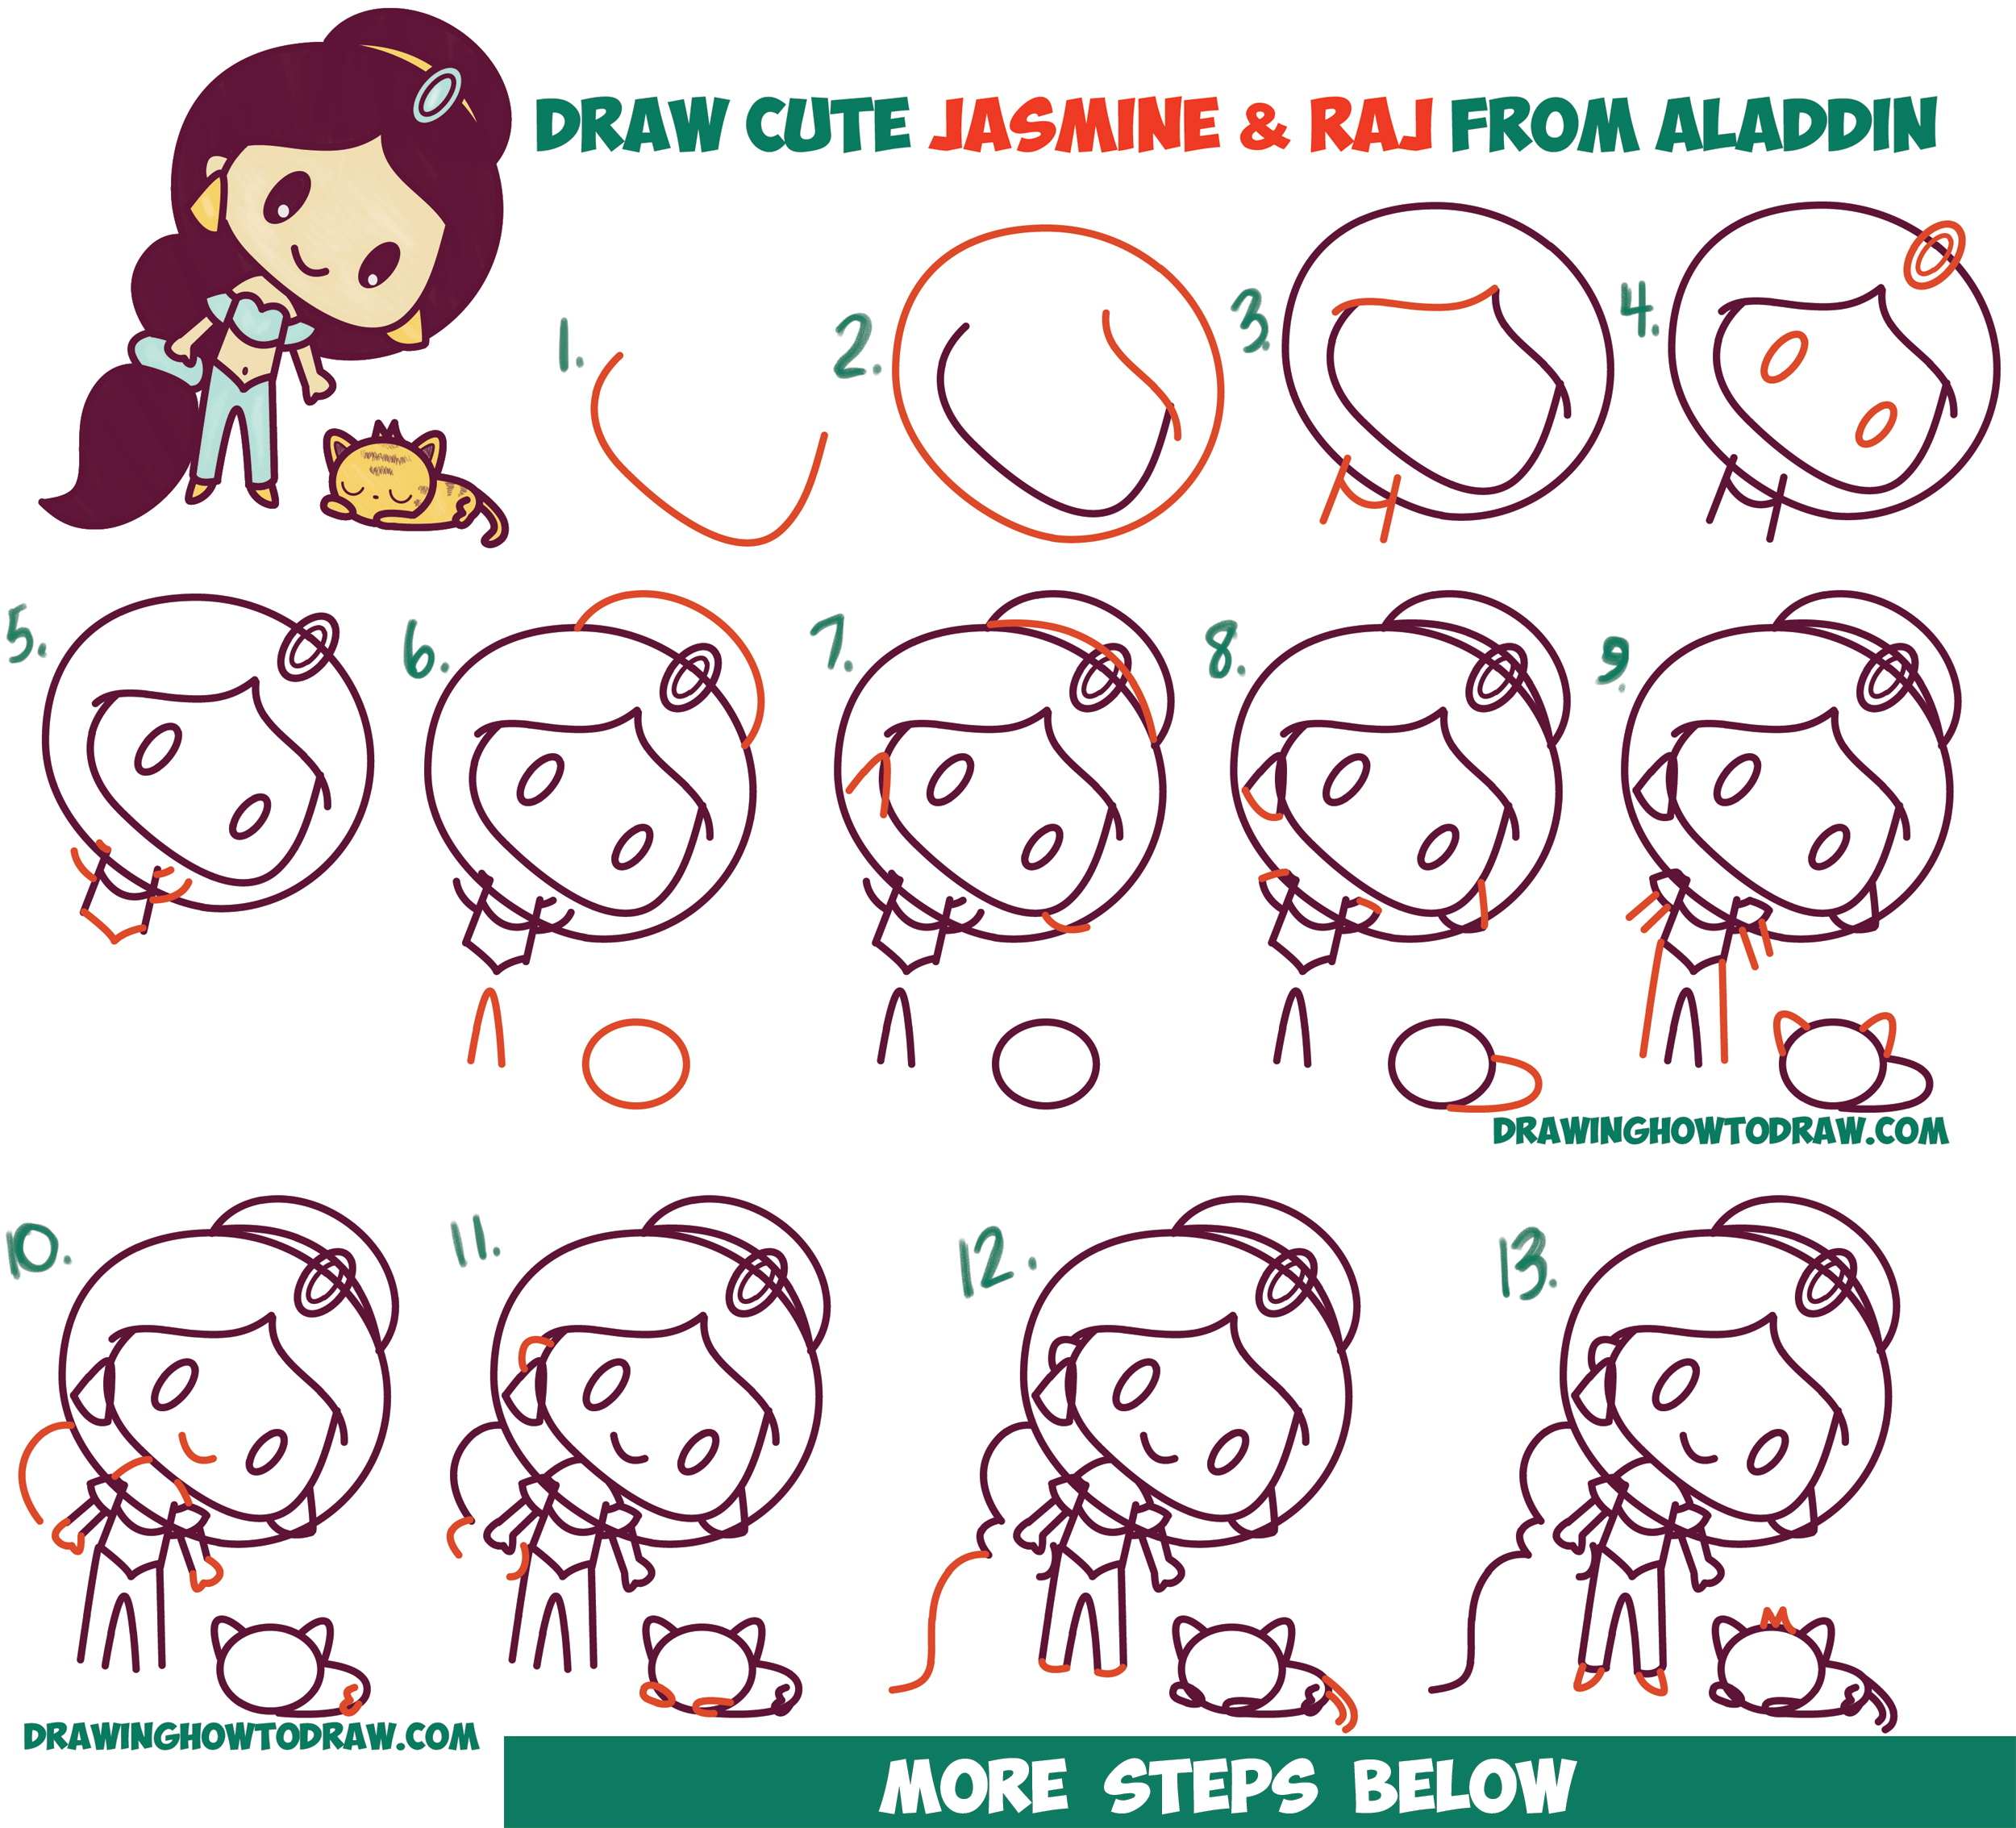 How to Draw Cute Chibi / Kawaii Jasmine & Raj the Tiger from Aladdin with Easy Step by Step Drawing Tutorial for Kids